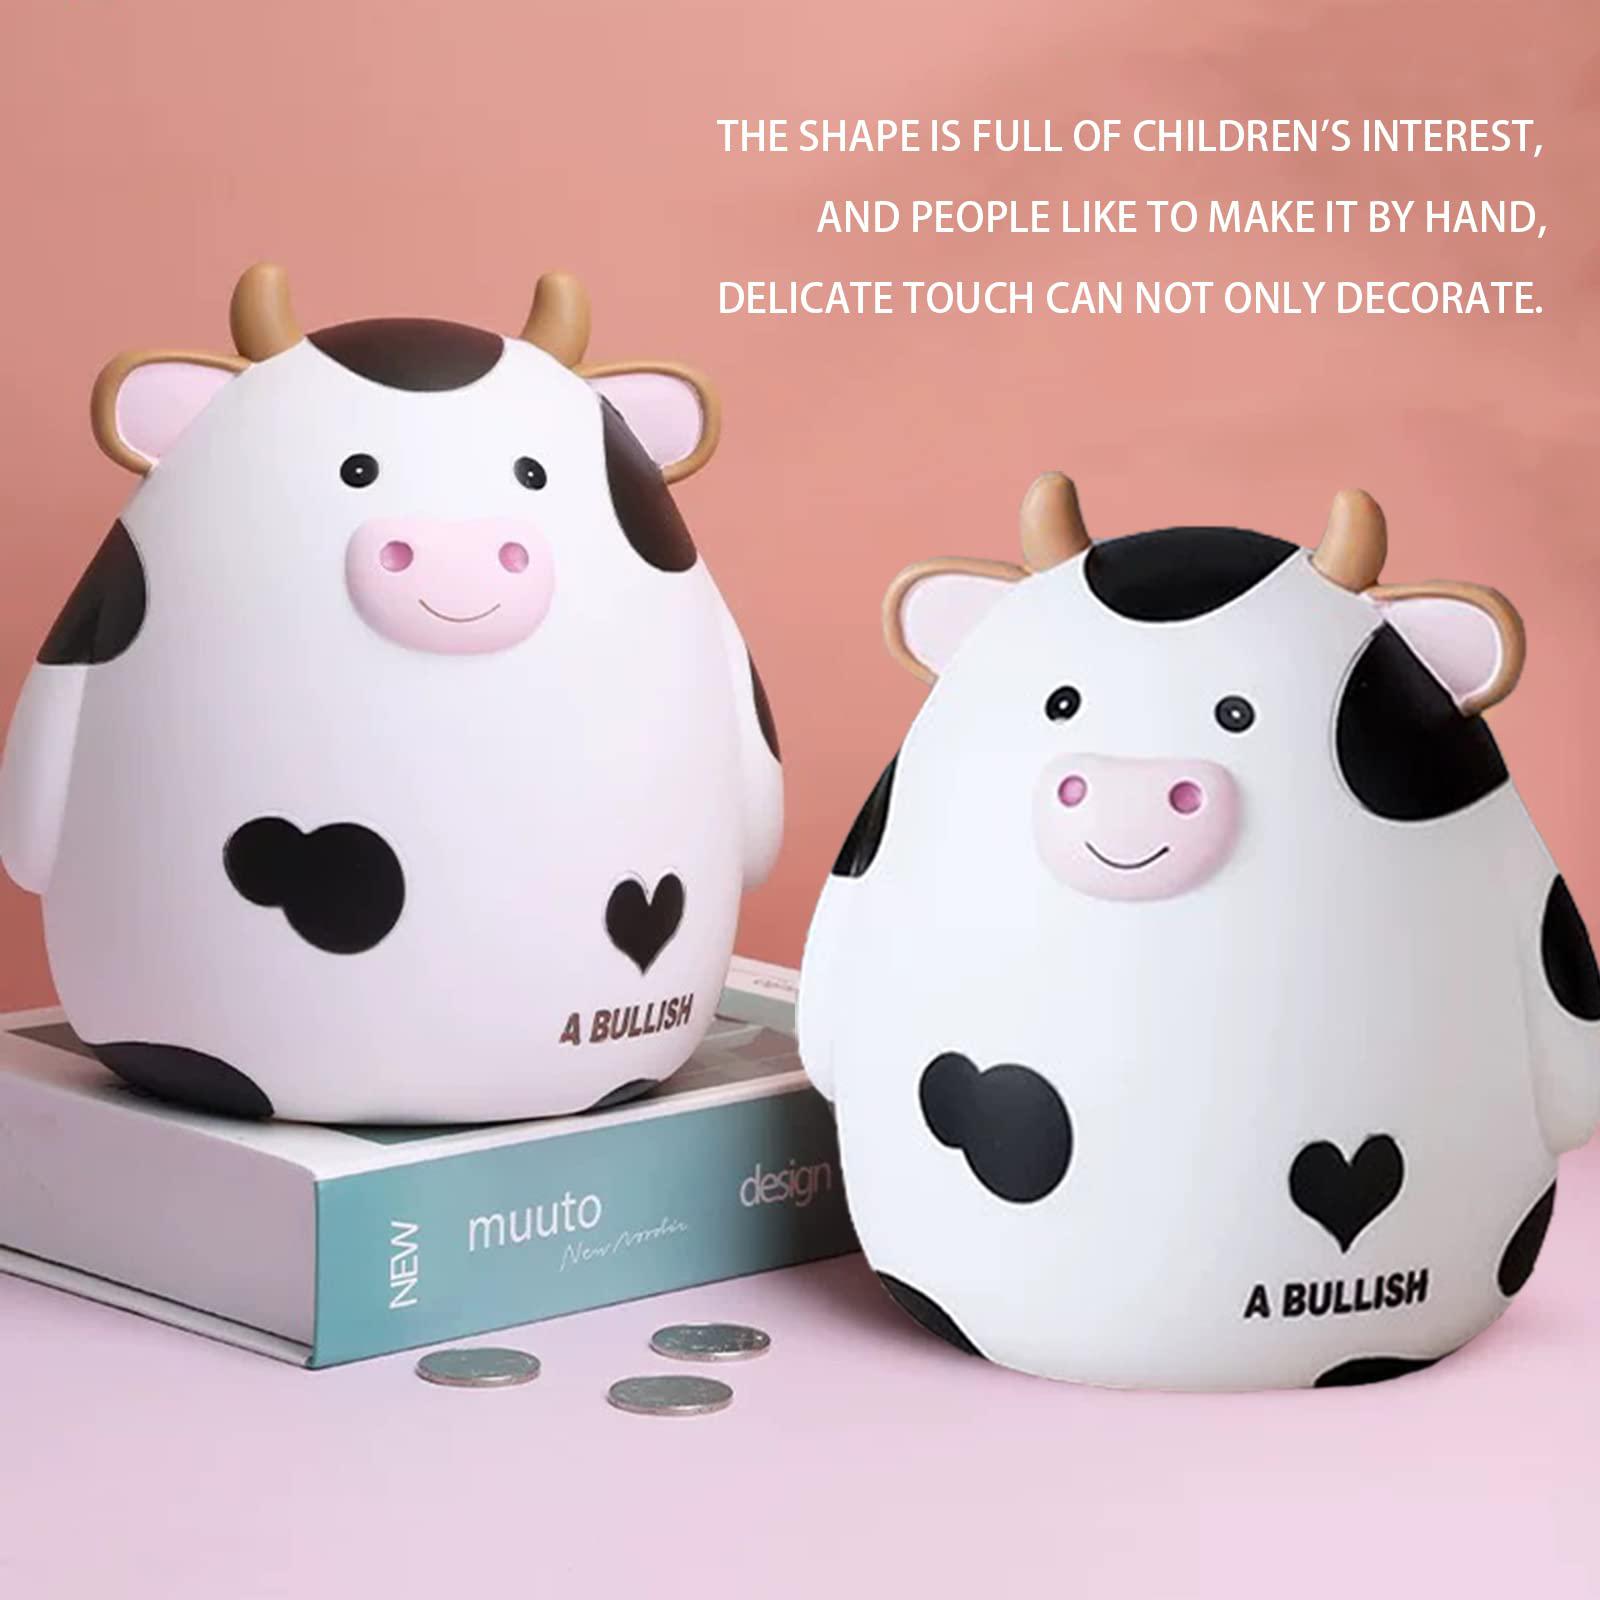 Cevly cow piggy bank, kids coin piggy bank toy, cute animal money bank toys large capacity money piggy banks with opening, plastic 